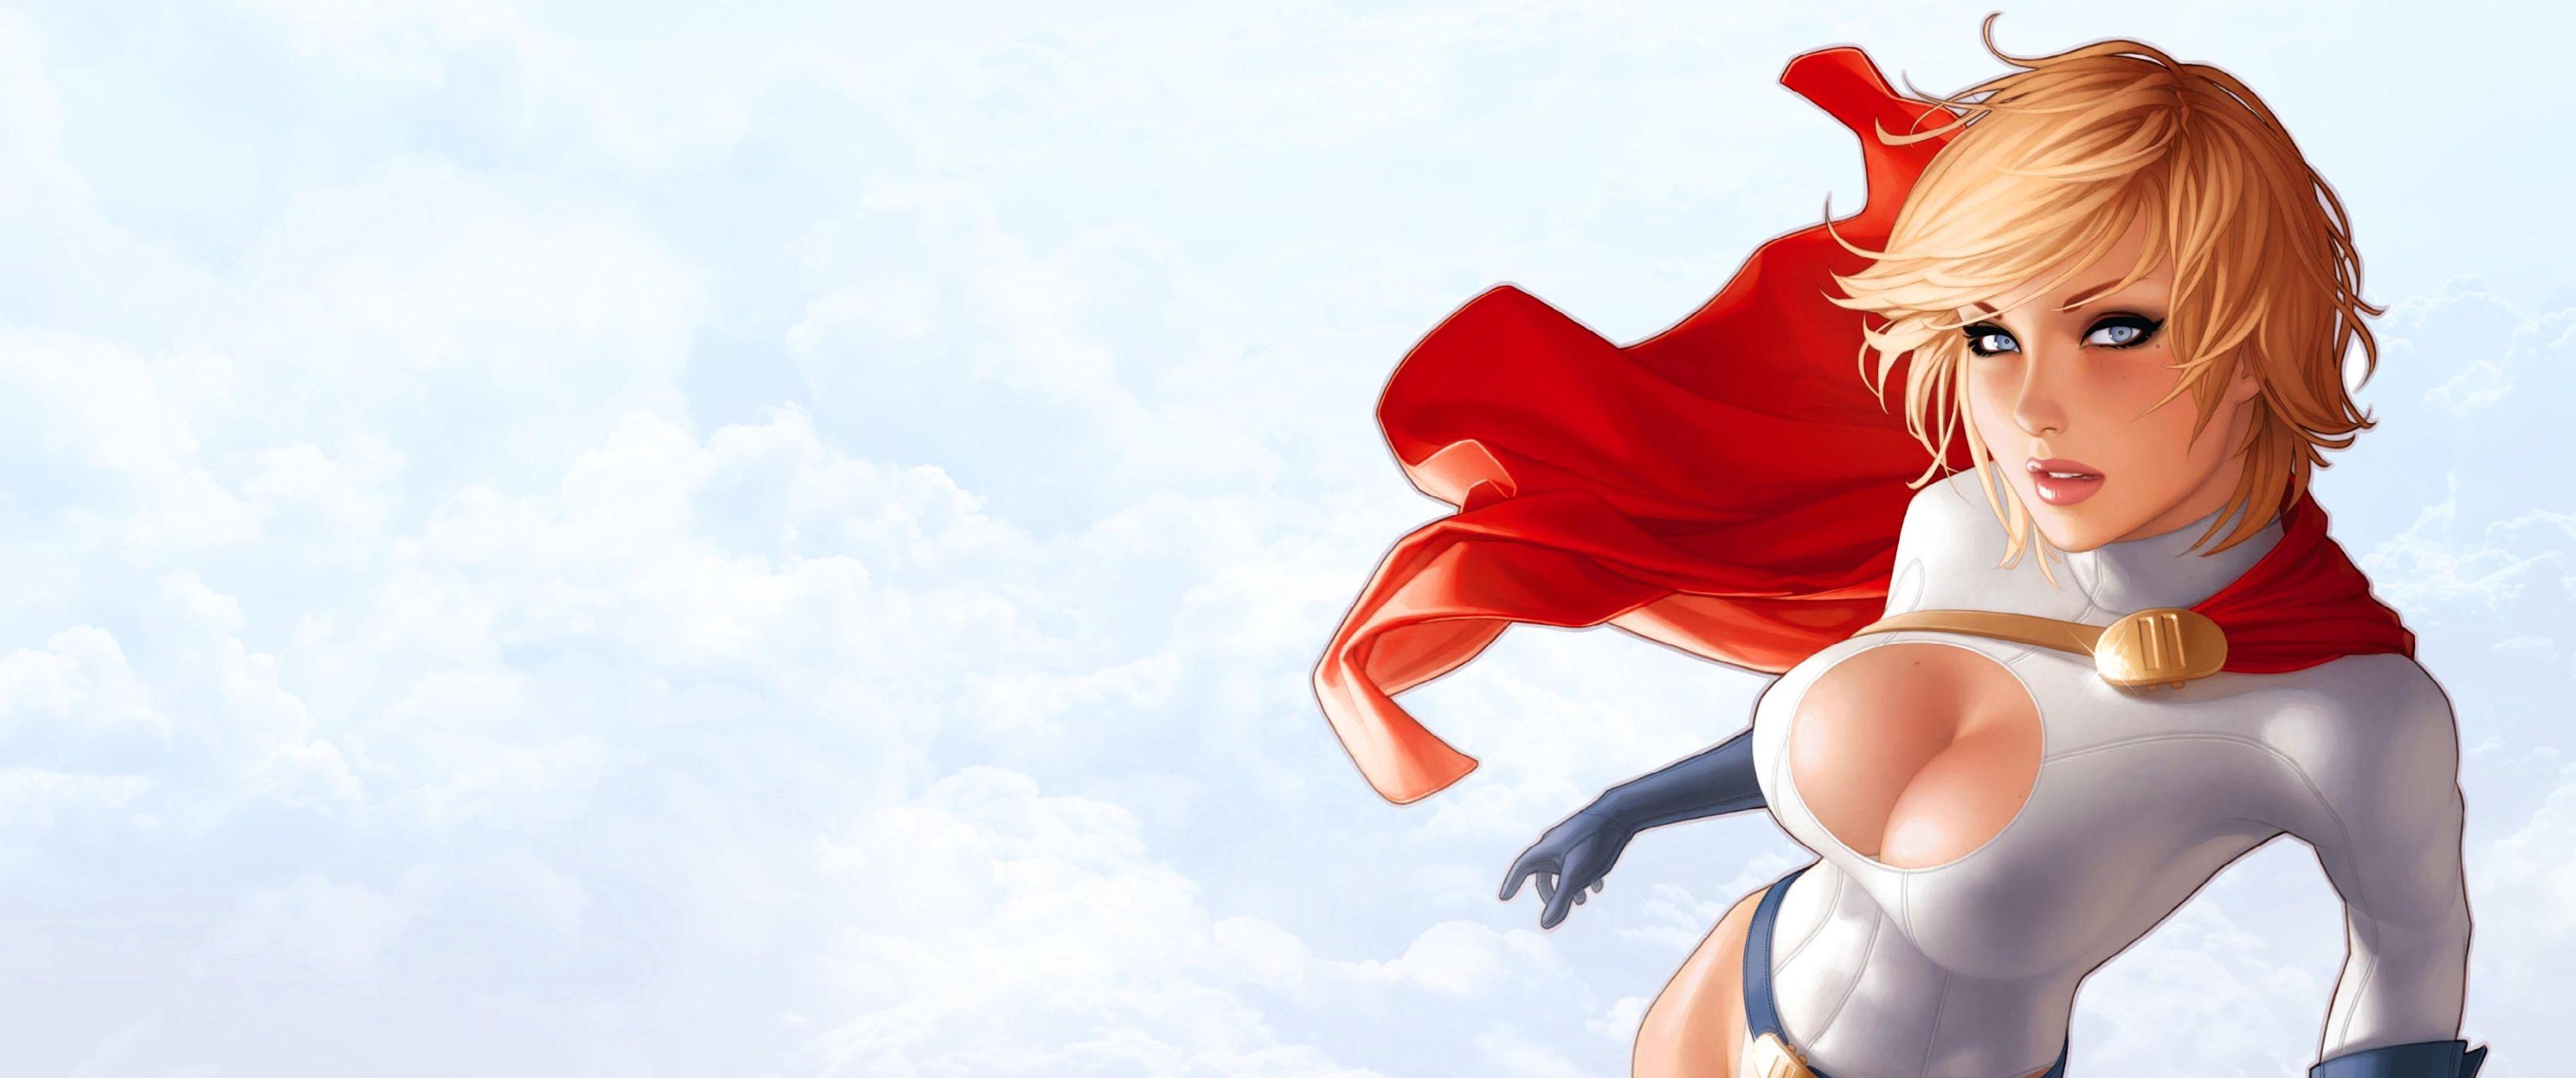 Power Girl HD Wallpaper and Background Image